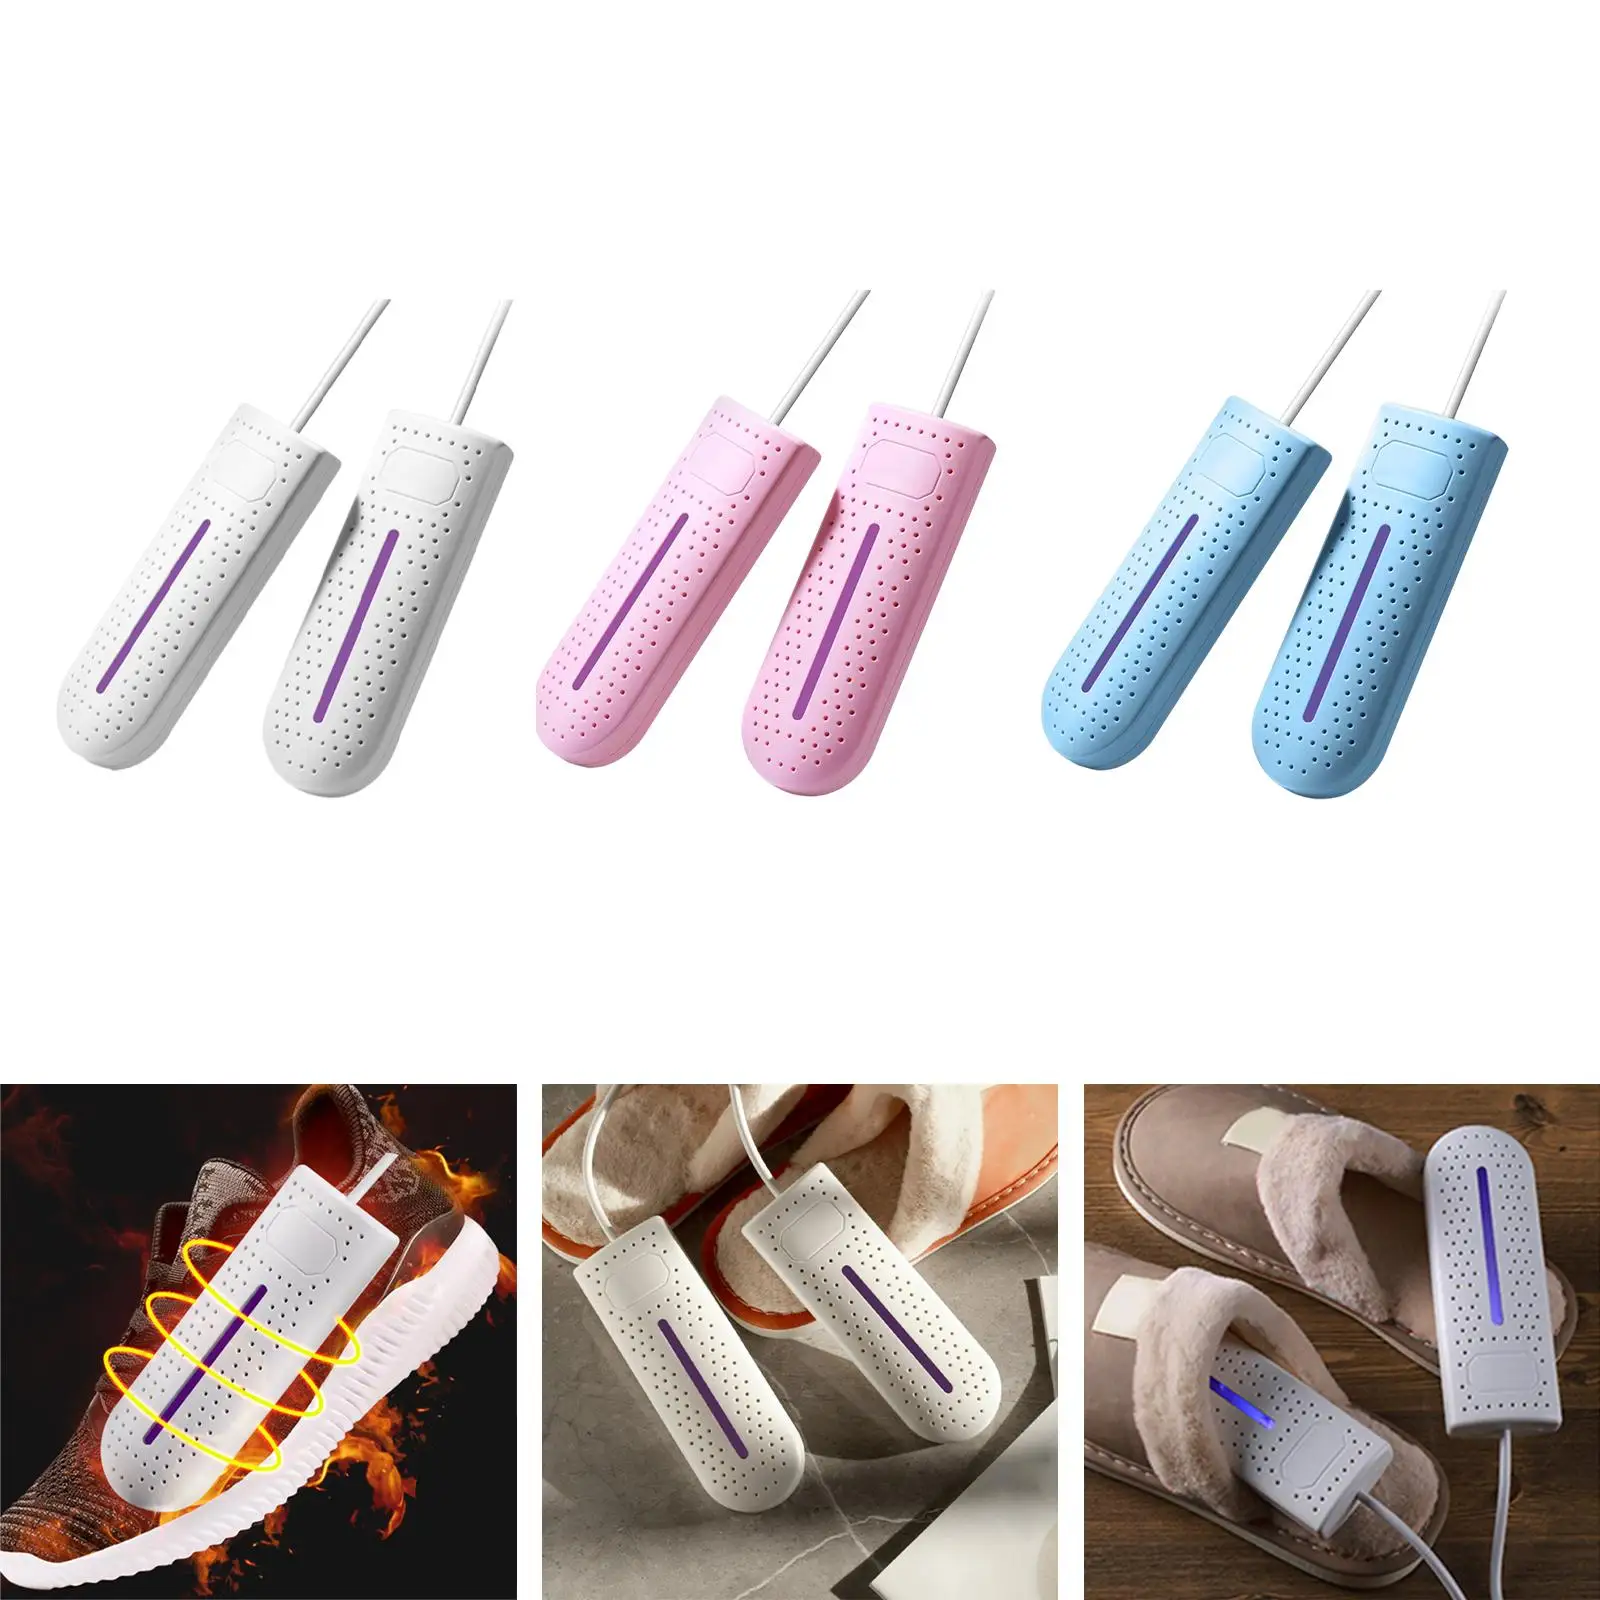 Electric 220V Household Shoes Dryer Timer Drying PTC Drying Compact USB Wired Shoes Warmer for Cotton Slippers School Dormitory